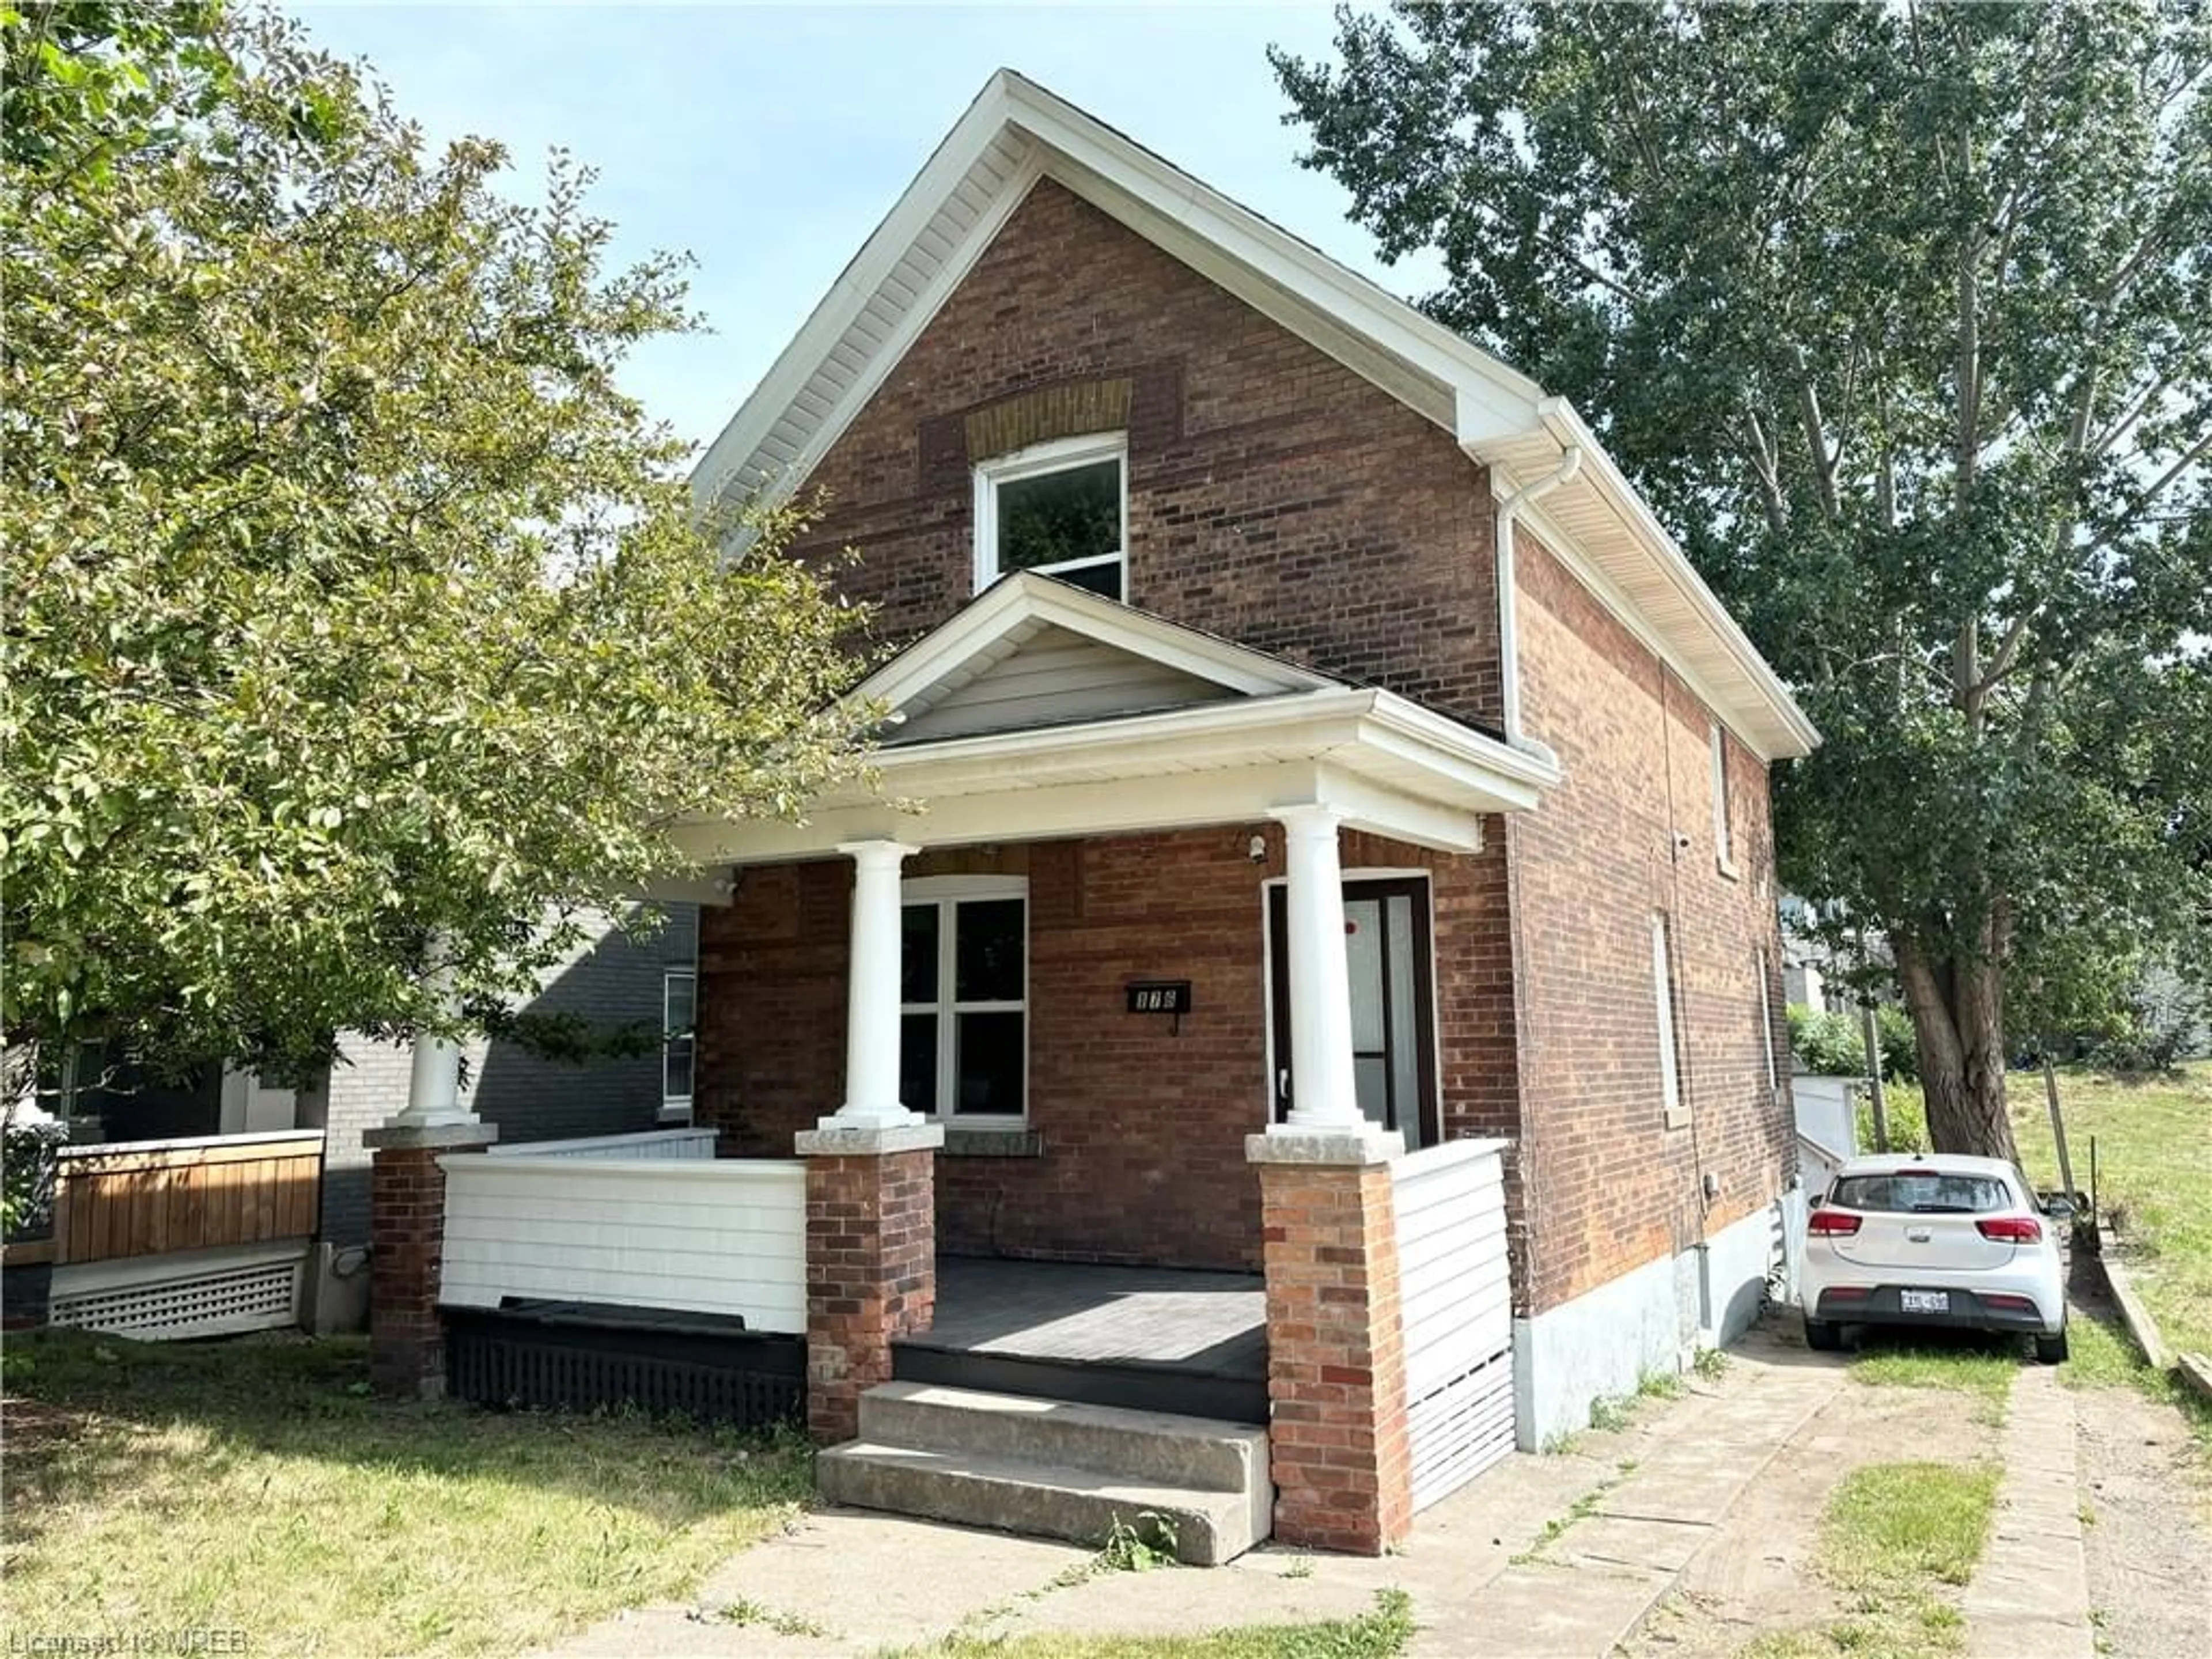 Home with brick exterior material for 176 Church St, St. Catharines Ontario L2R 3E7